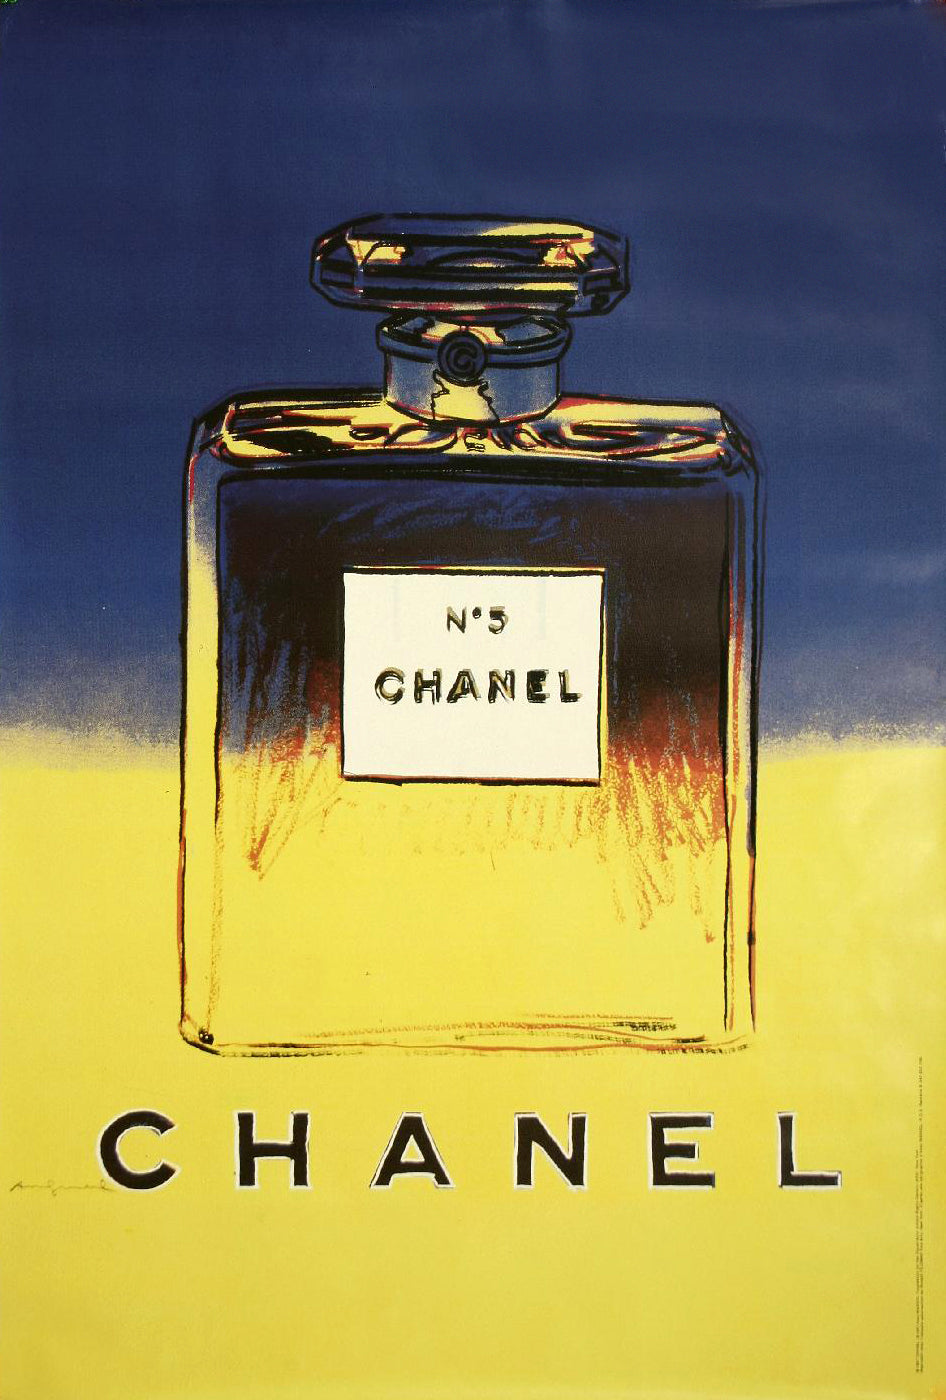 Vintage Poster Chanel N°5 Andy Warhol (Yellow & Blue Version)